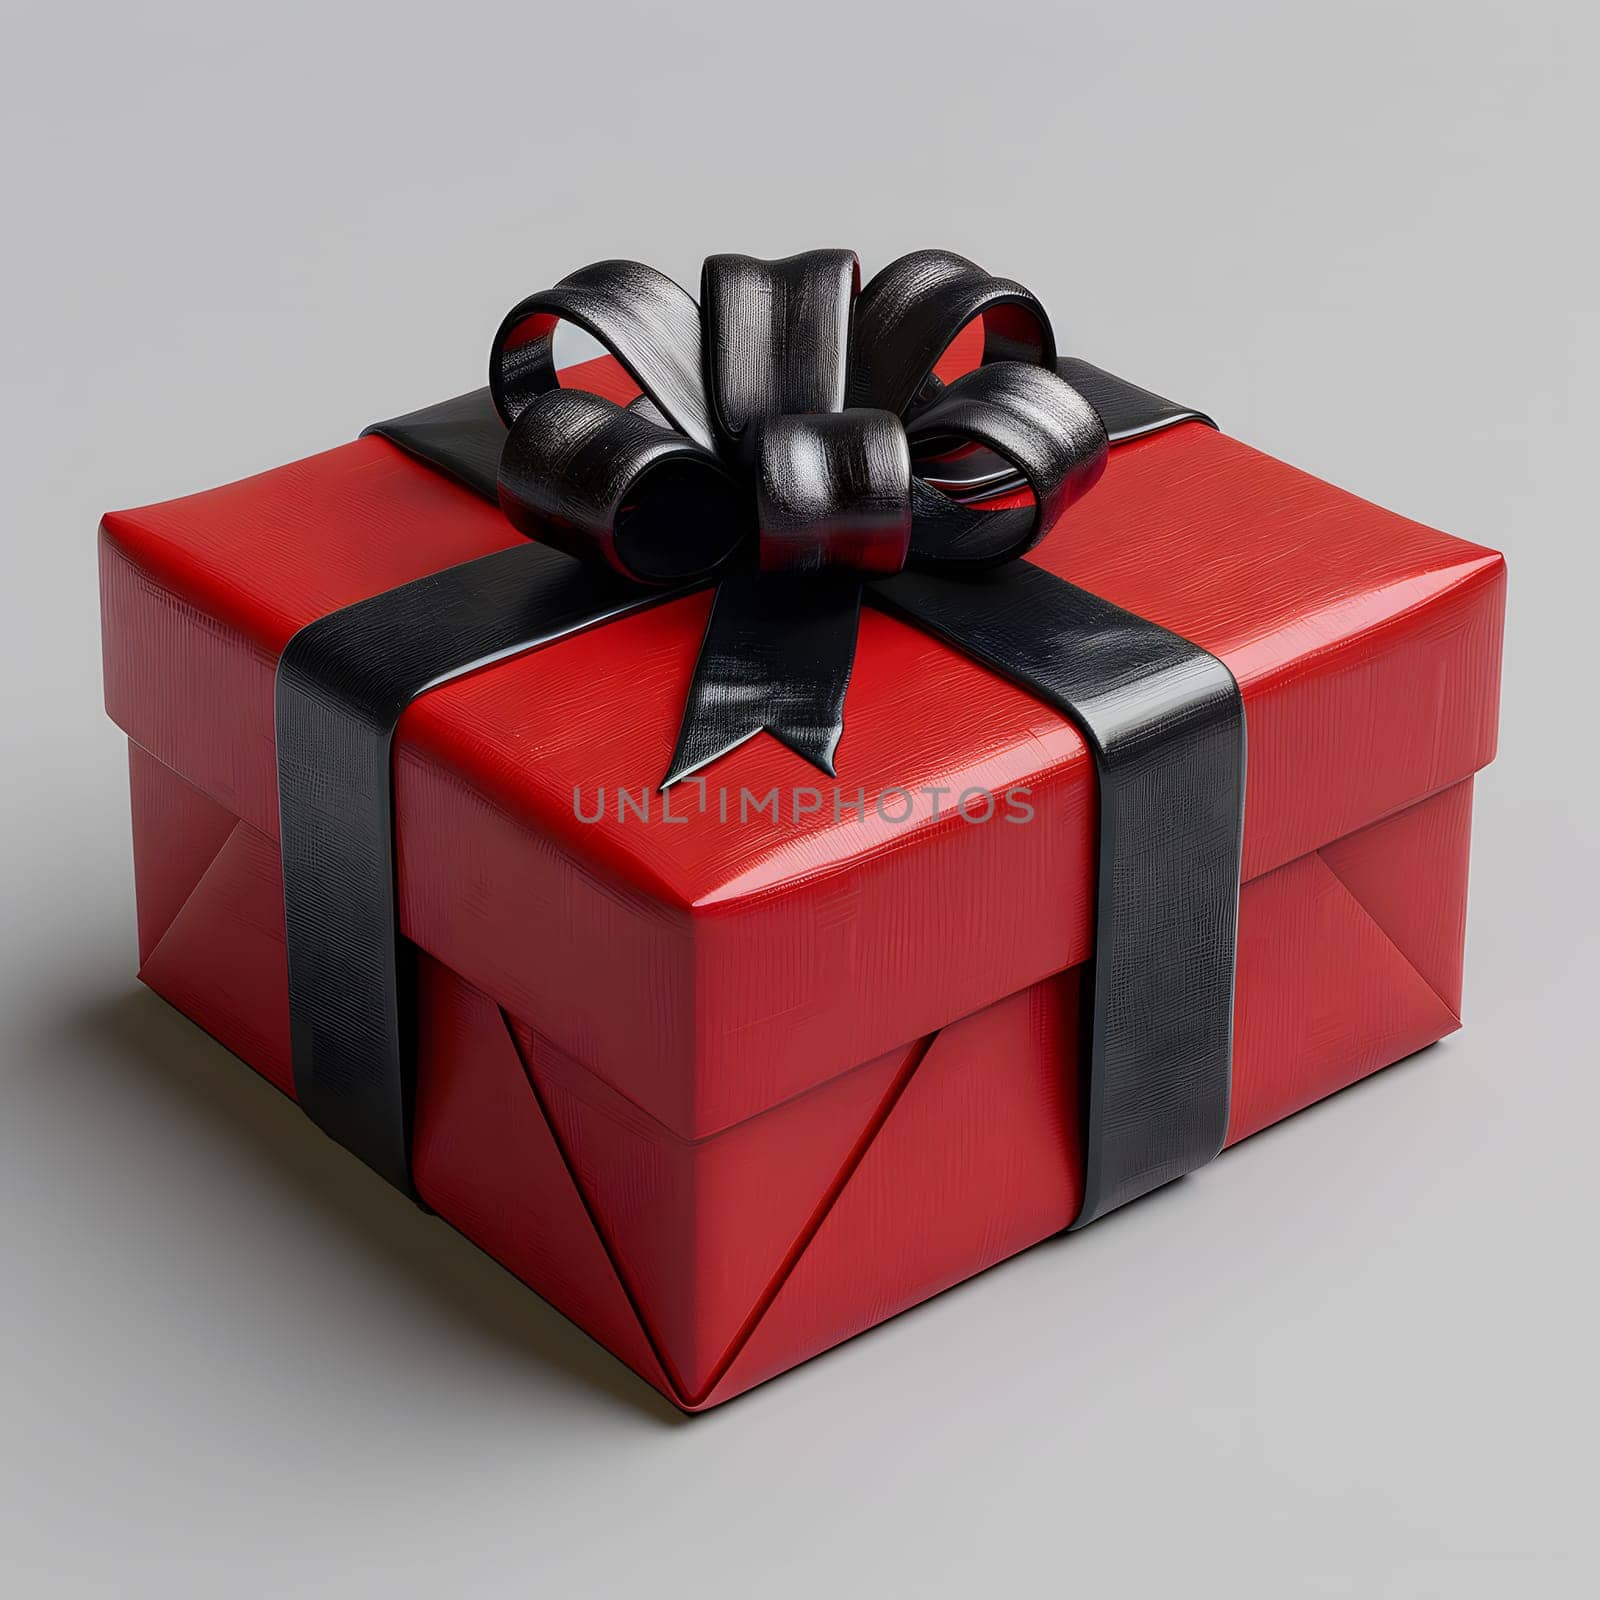 Elegant red gift box with black ribbon and bow for special occasions by Nadtochiy